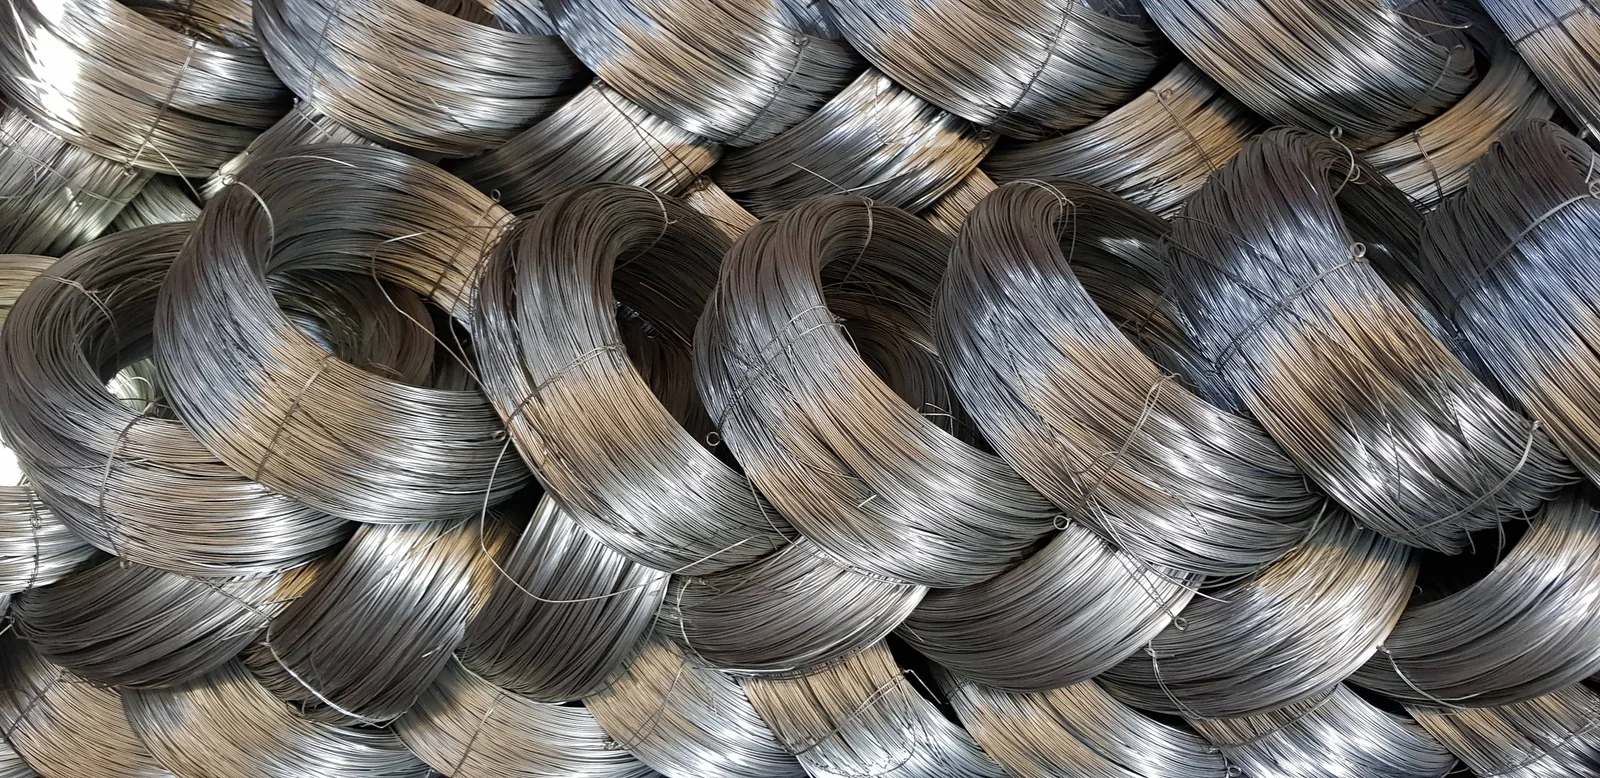 Buying and using galvanized wire